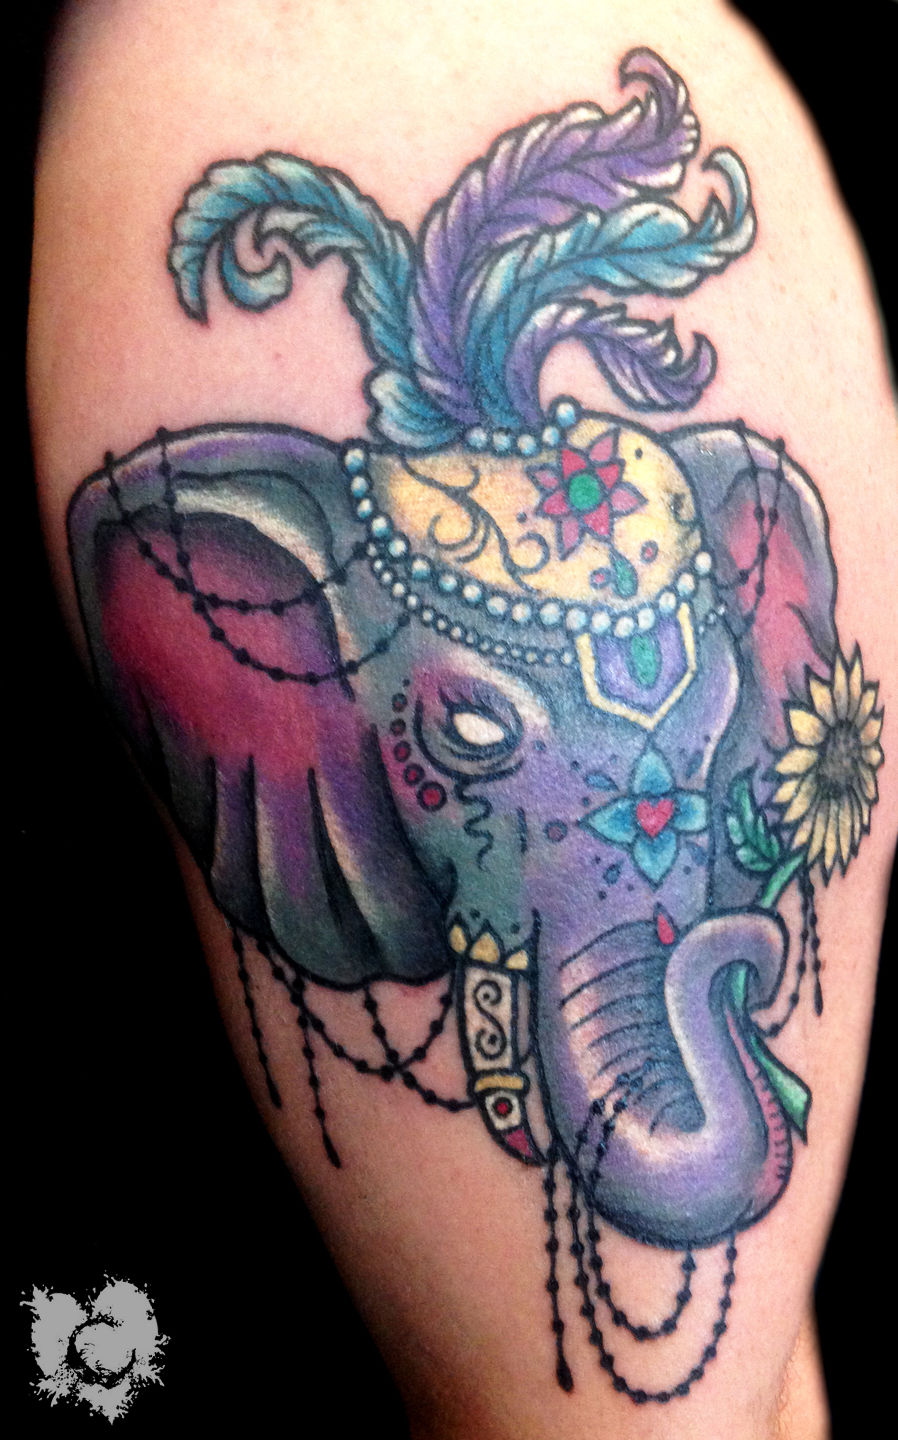 Colorful Neo Elephant Head Tattoo Design For Thigh